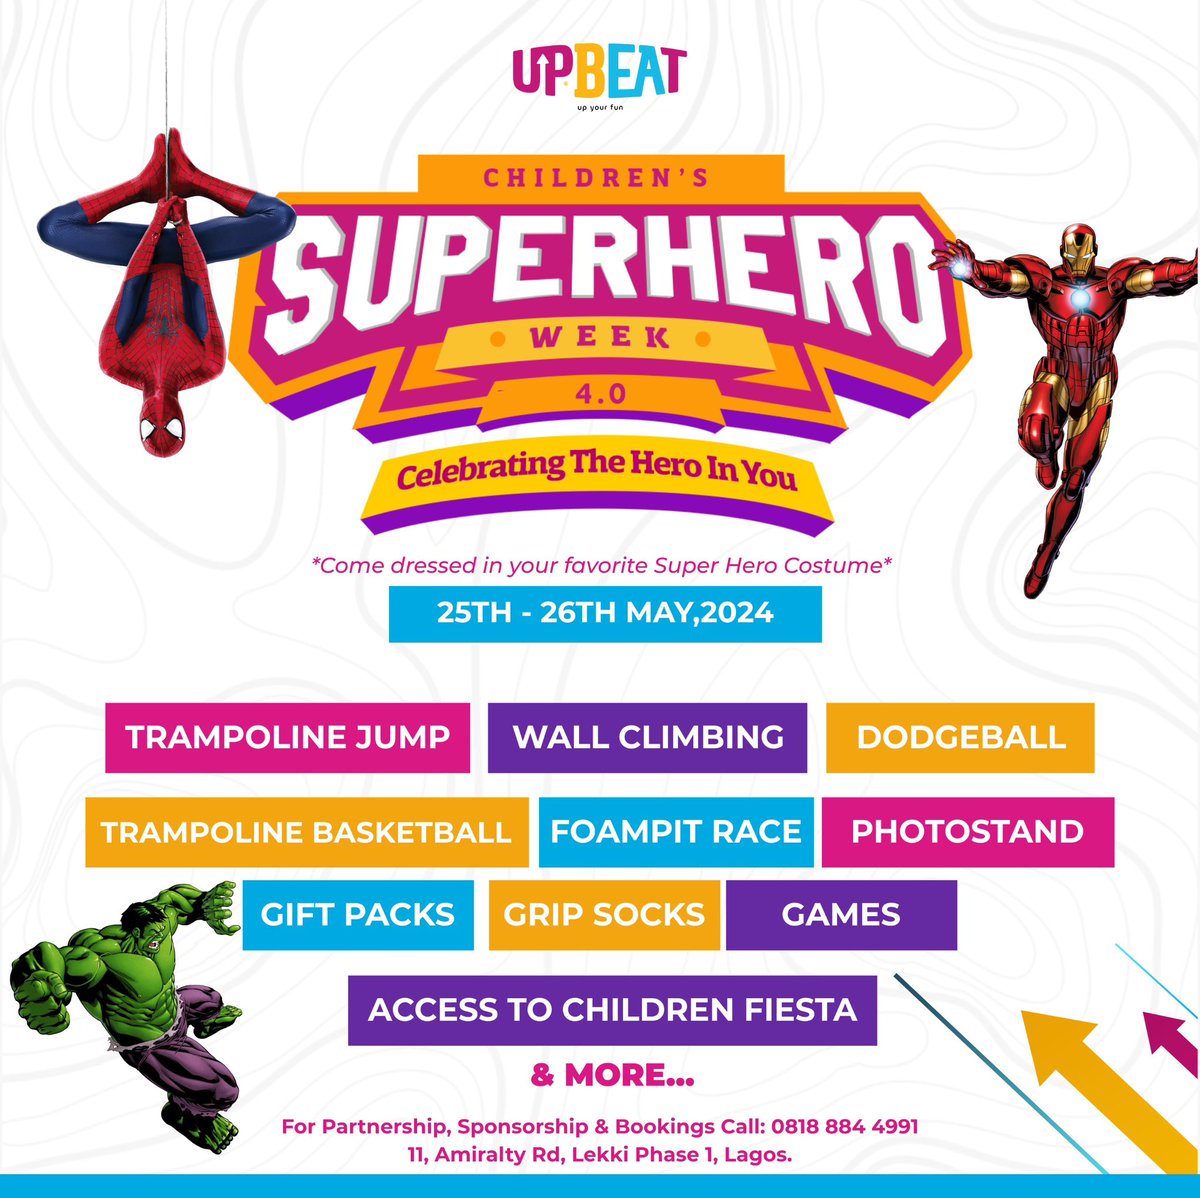 Will You Be At the Children’s day/Superhero Day Event? Enjoy: Access to the Children Fiesta Fun obstacles and games Live entertainment Trampoline jumping Wall climbing Trampoline basketball Face Painting Foam pit race Art & Crafts sessions. #whattodoinlagos #games #fungames